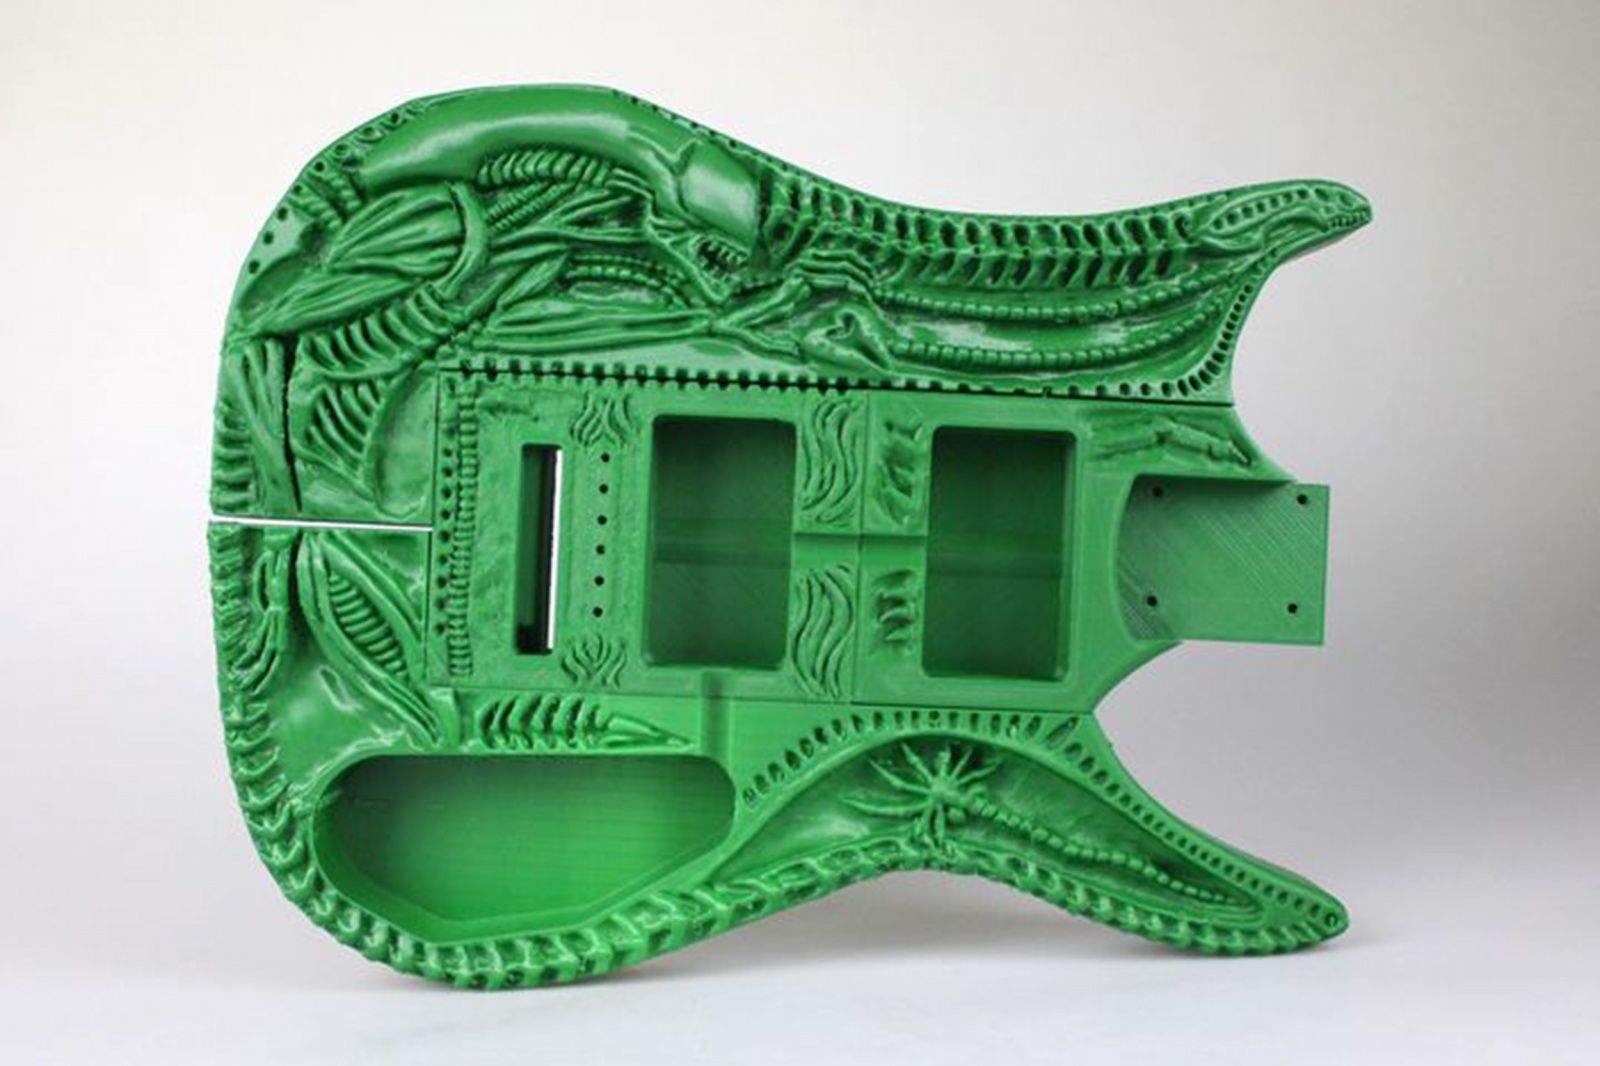 Let the creature from Alien inspire you to aggressively shred on this 3-D-printed guitar.